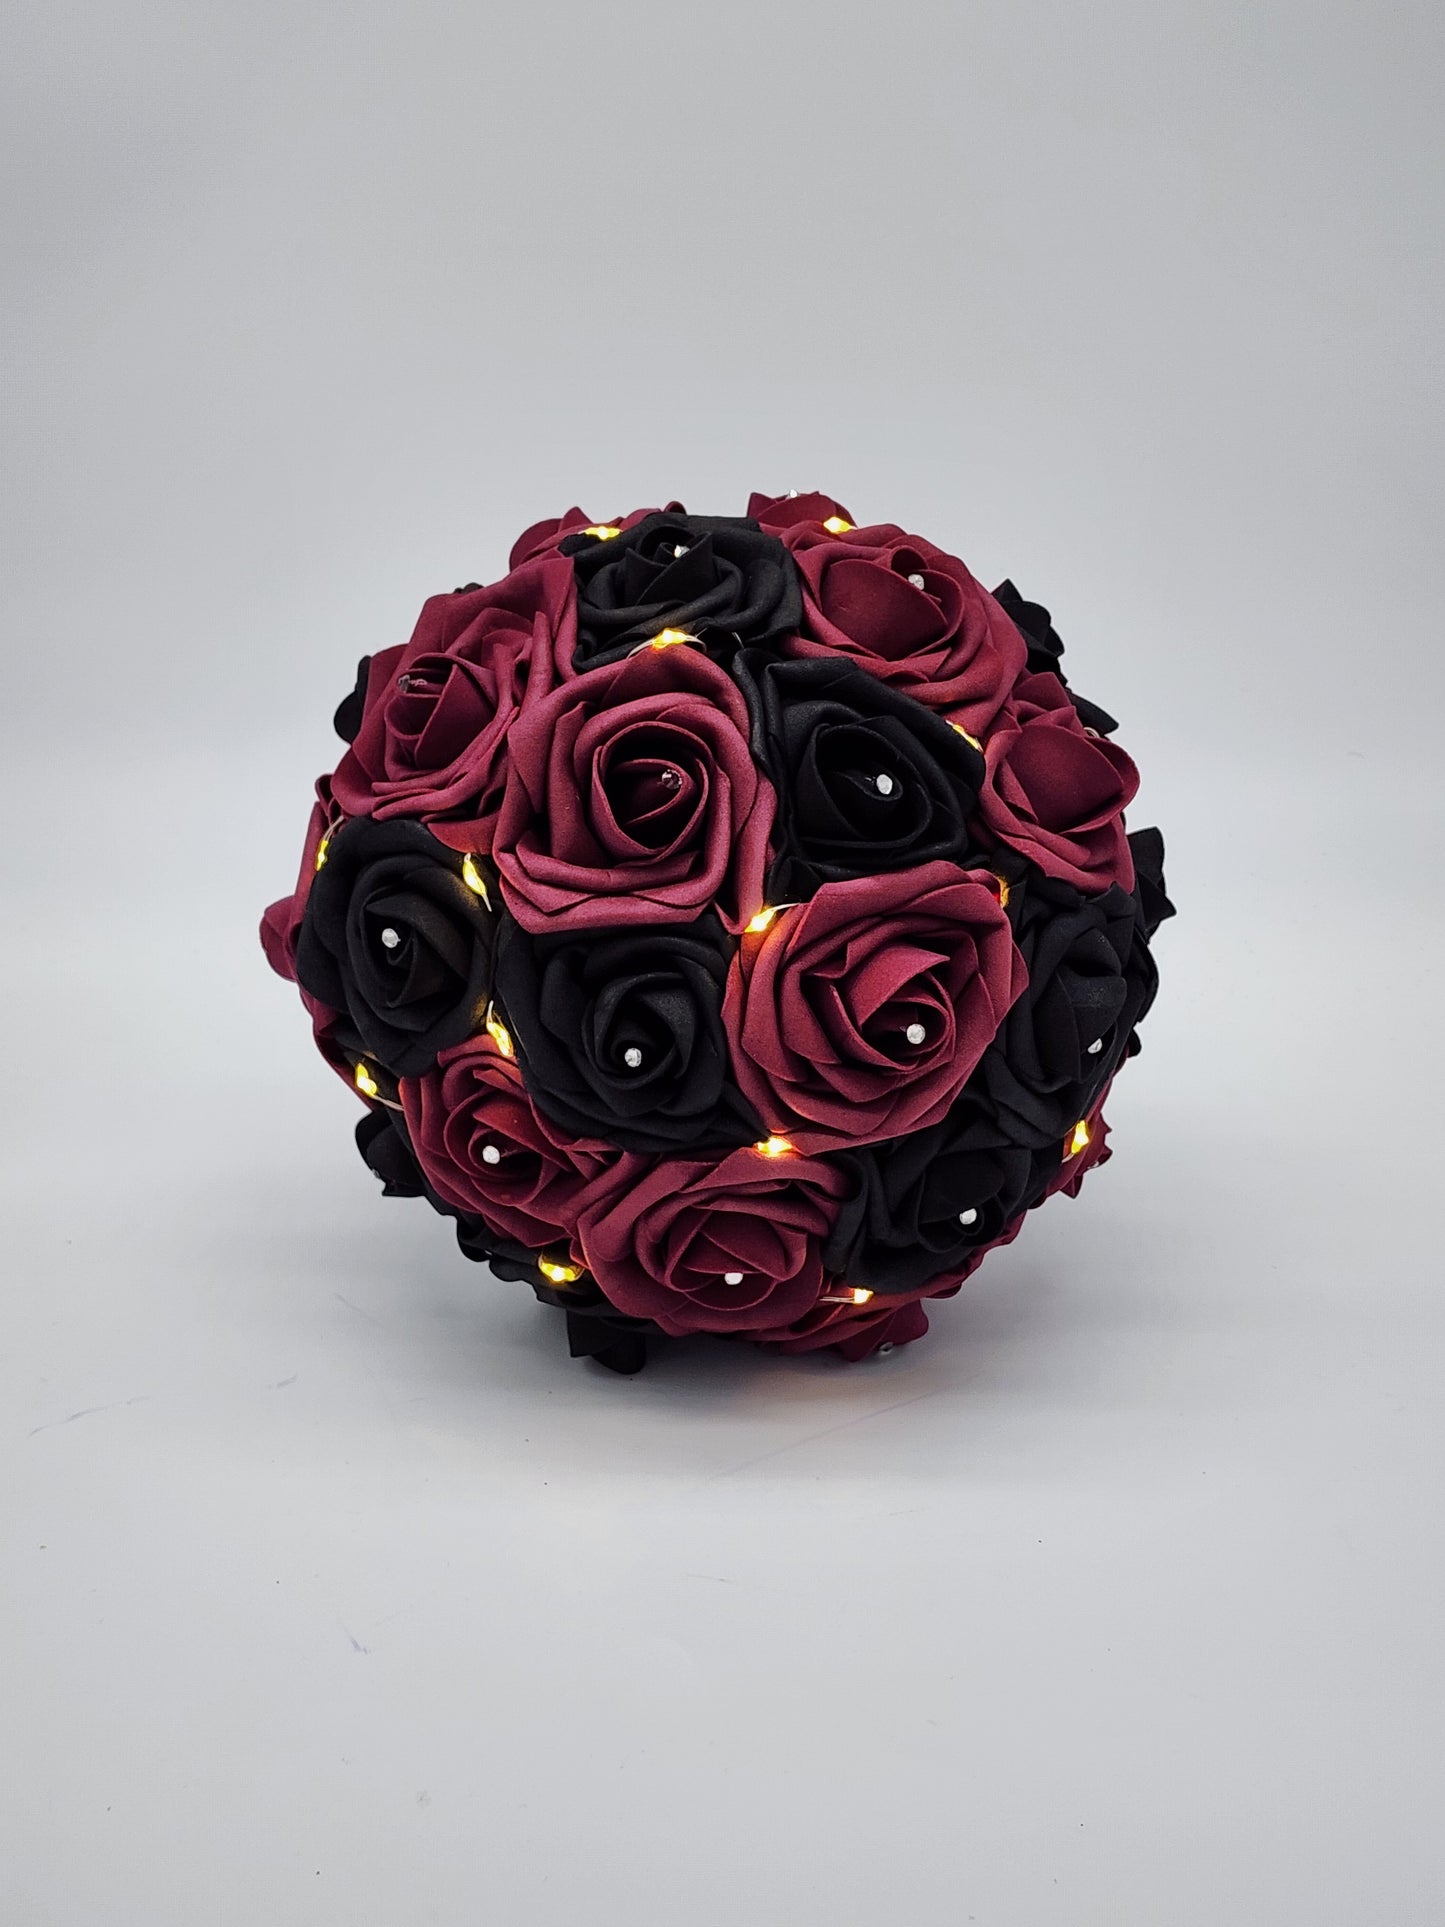 Fairy Lights Burgundy and black Bridal Bouquet